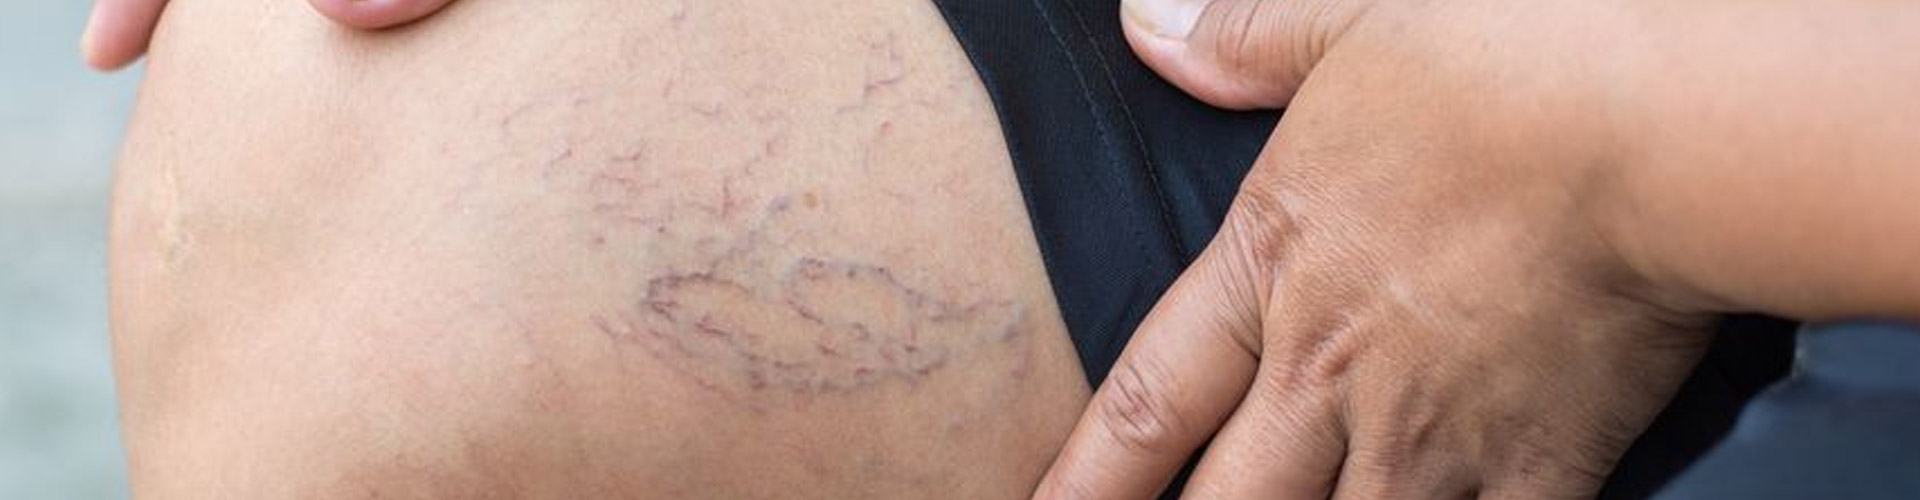 Varicose Veins vs. Spider Veins: What's the Difference?